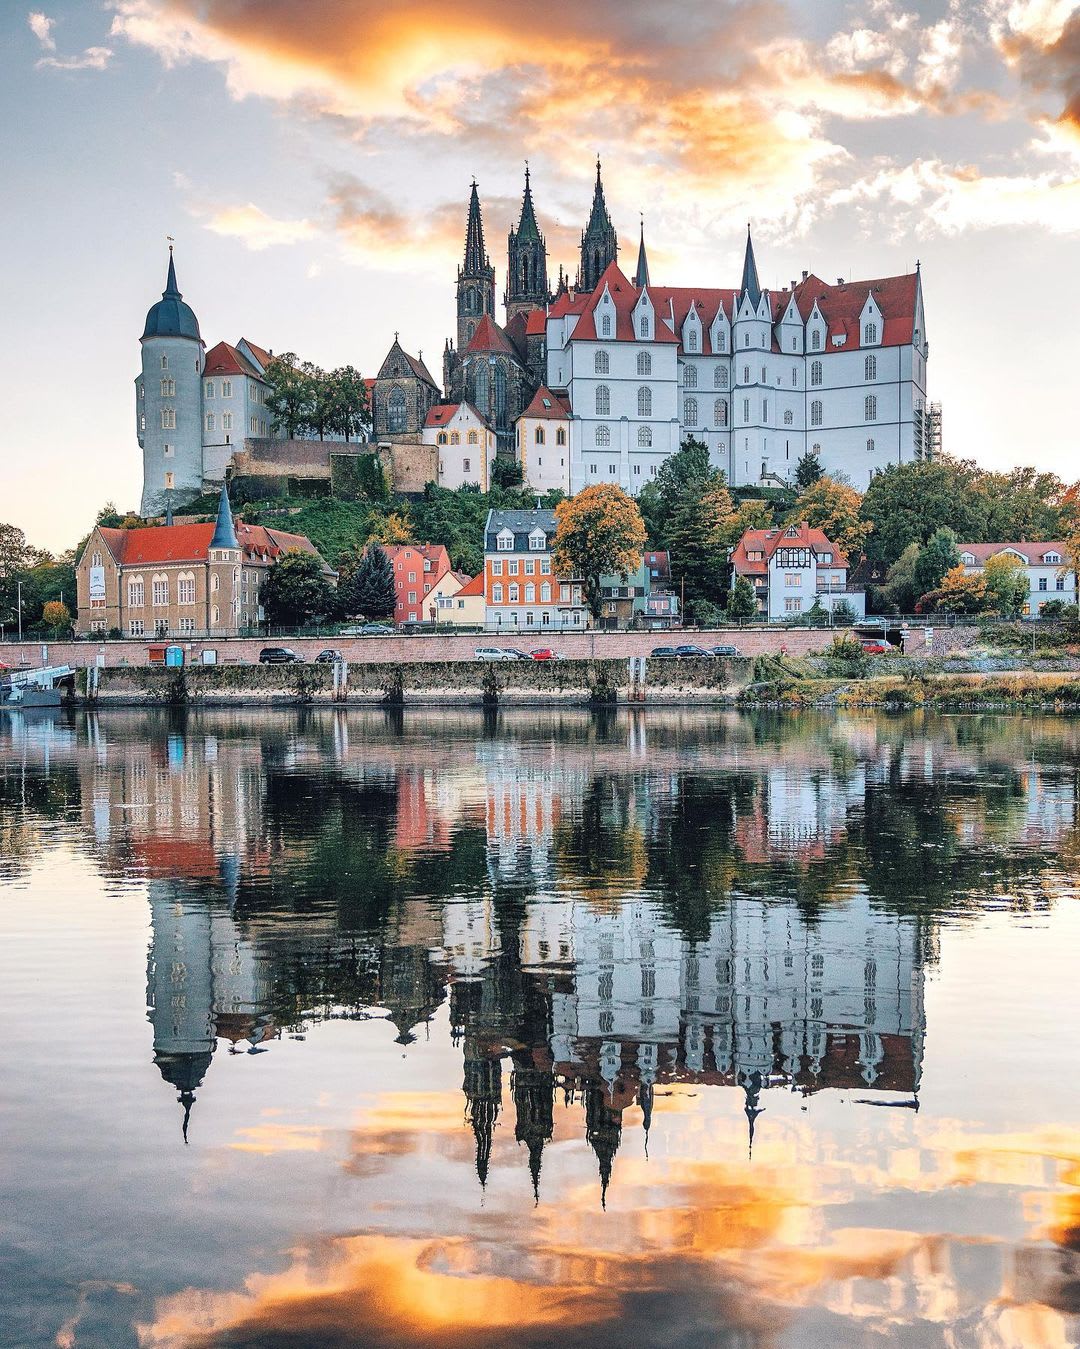 Albrechtsburg, a 15th century Late Gothic and early Renaissance castle on a hill above the river Elbe flowing through the town of Meissen, Saxony, Germany.